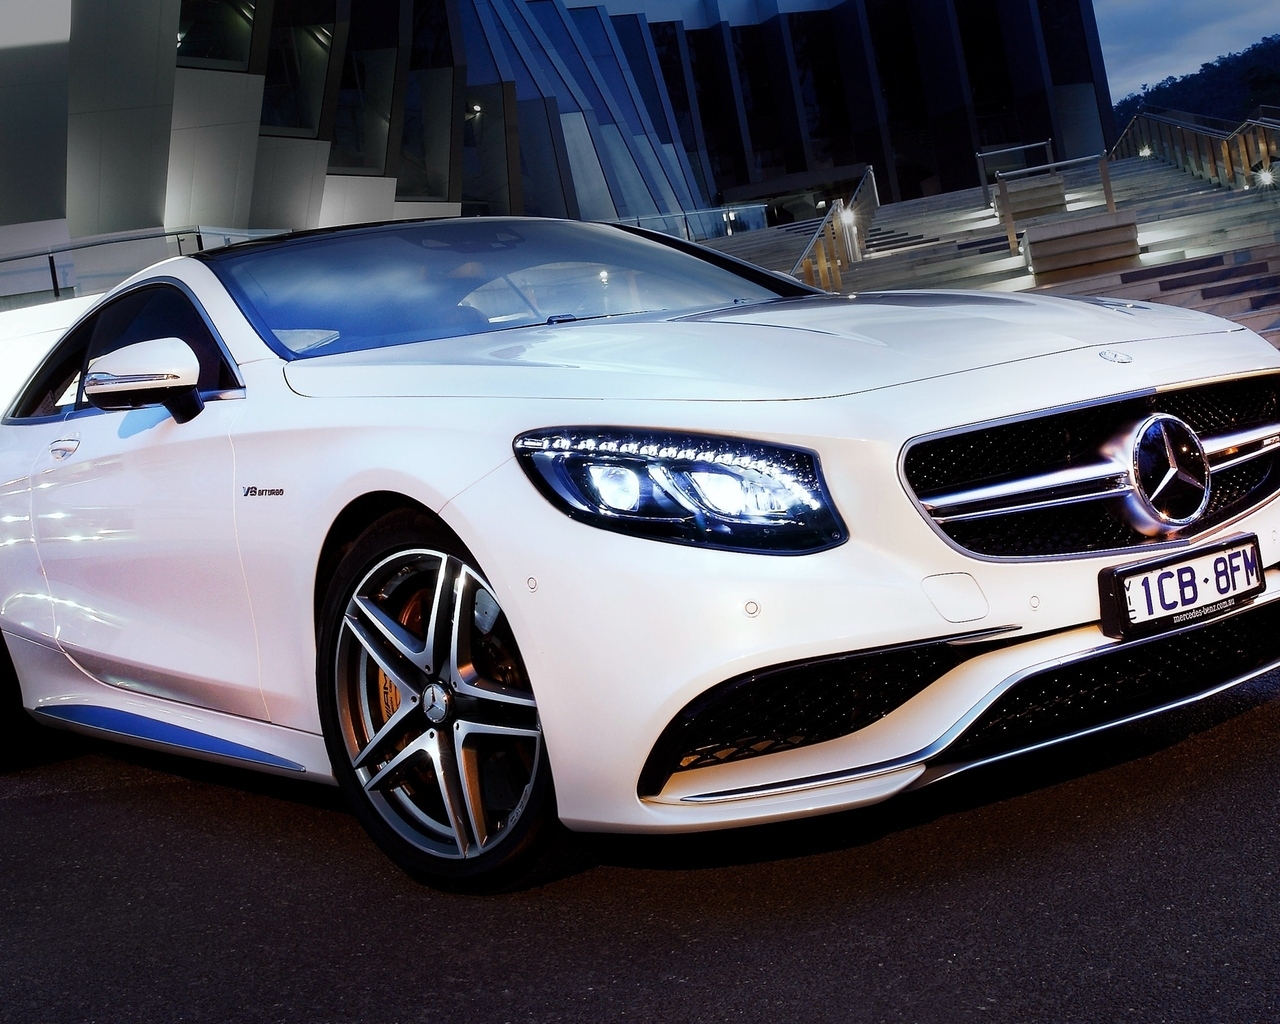 Mercedes Benz S63 AMG 2015 for 1280 x 1024 resolution